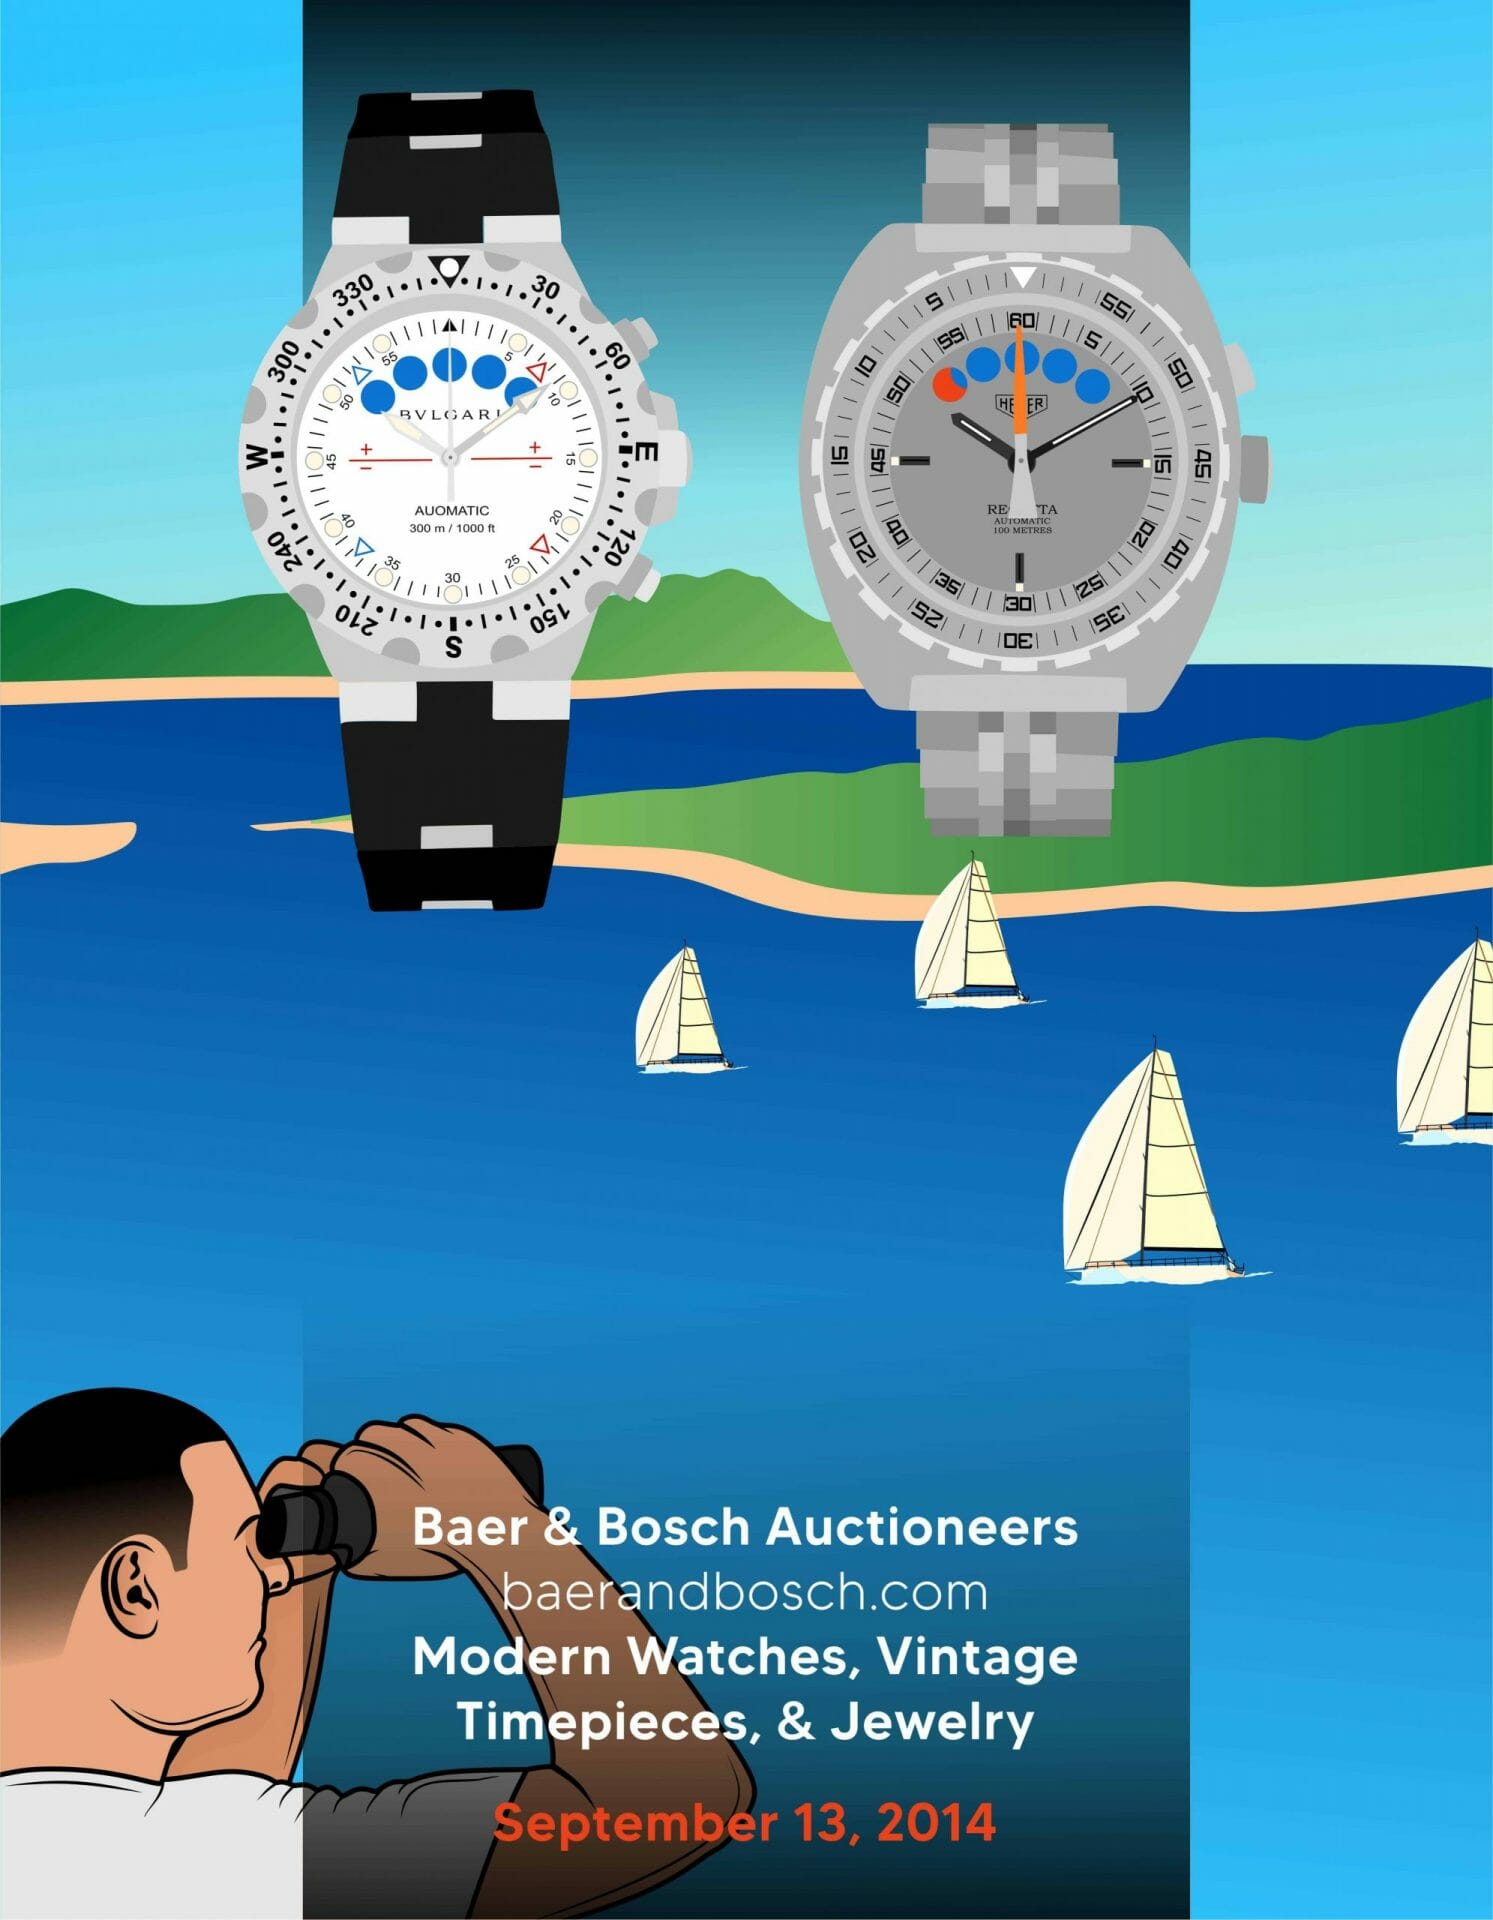 Modern Watches, Vintage Timepieces, & Jewelry 09.13.14 Baer & Bosch Auctioneers